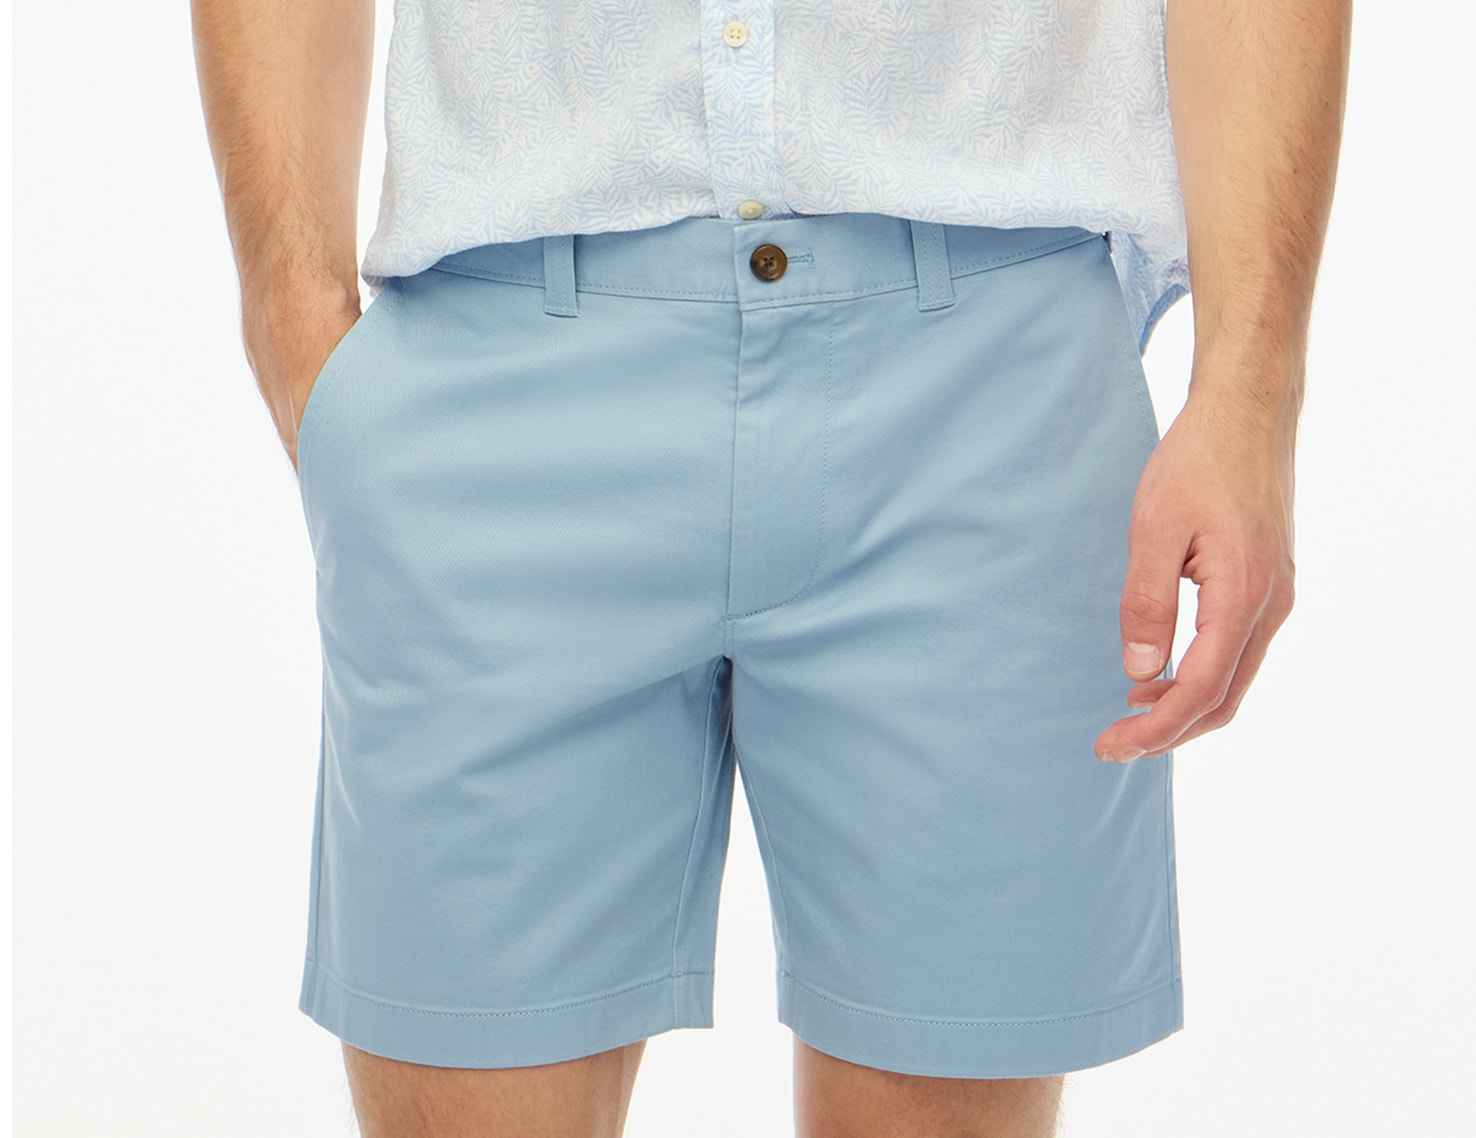 How Men's Shorts Should Fit - Fit Guide (How To Wear Shorts) 